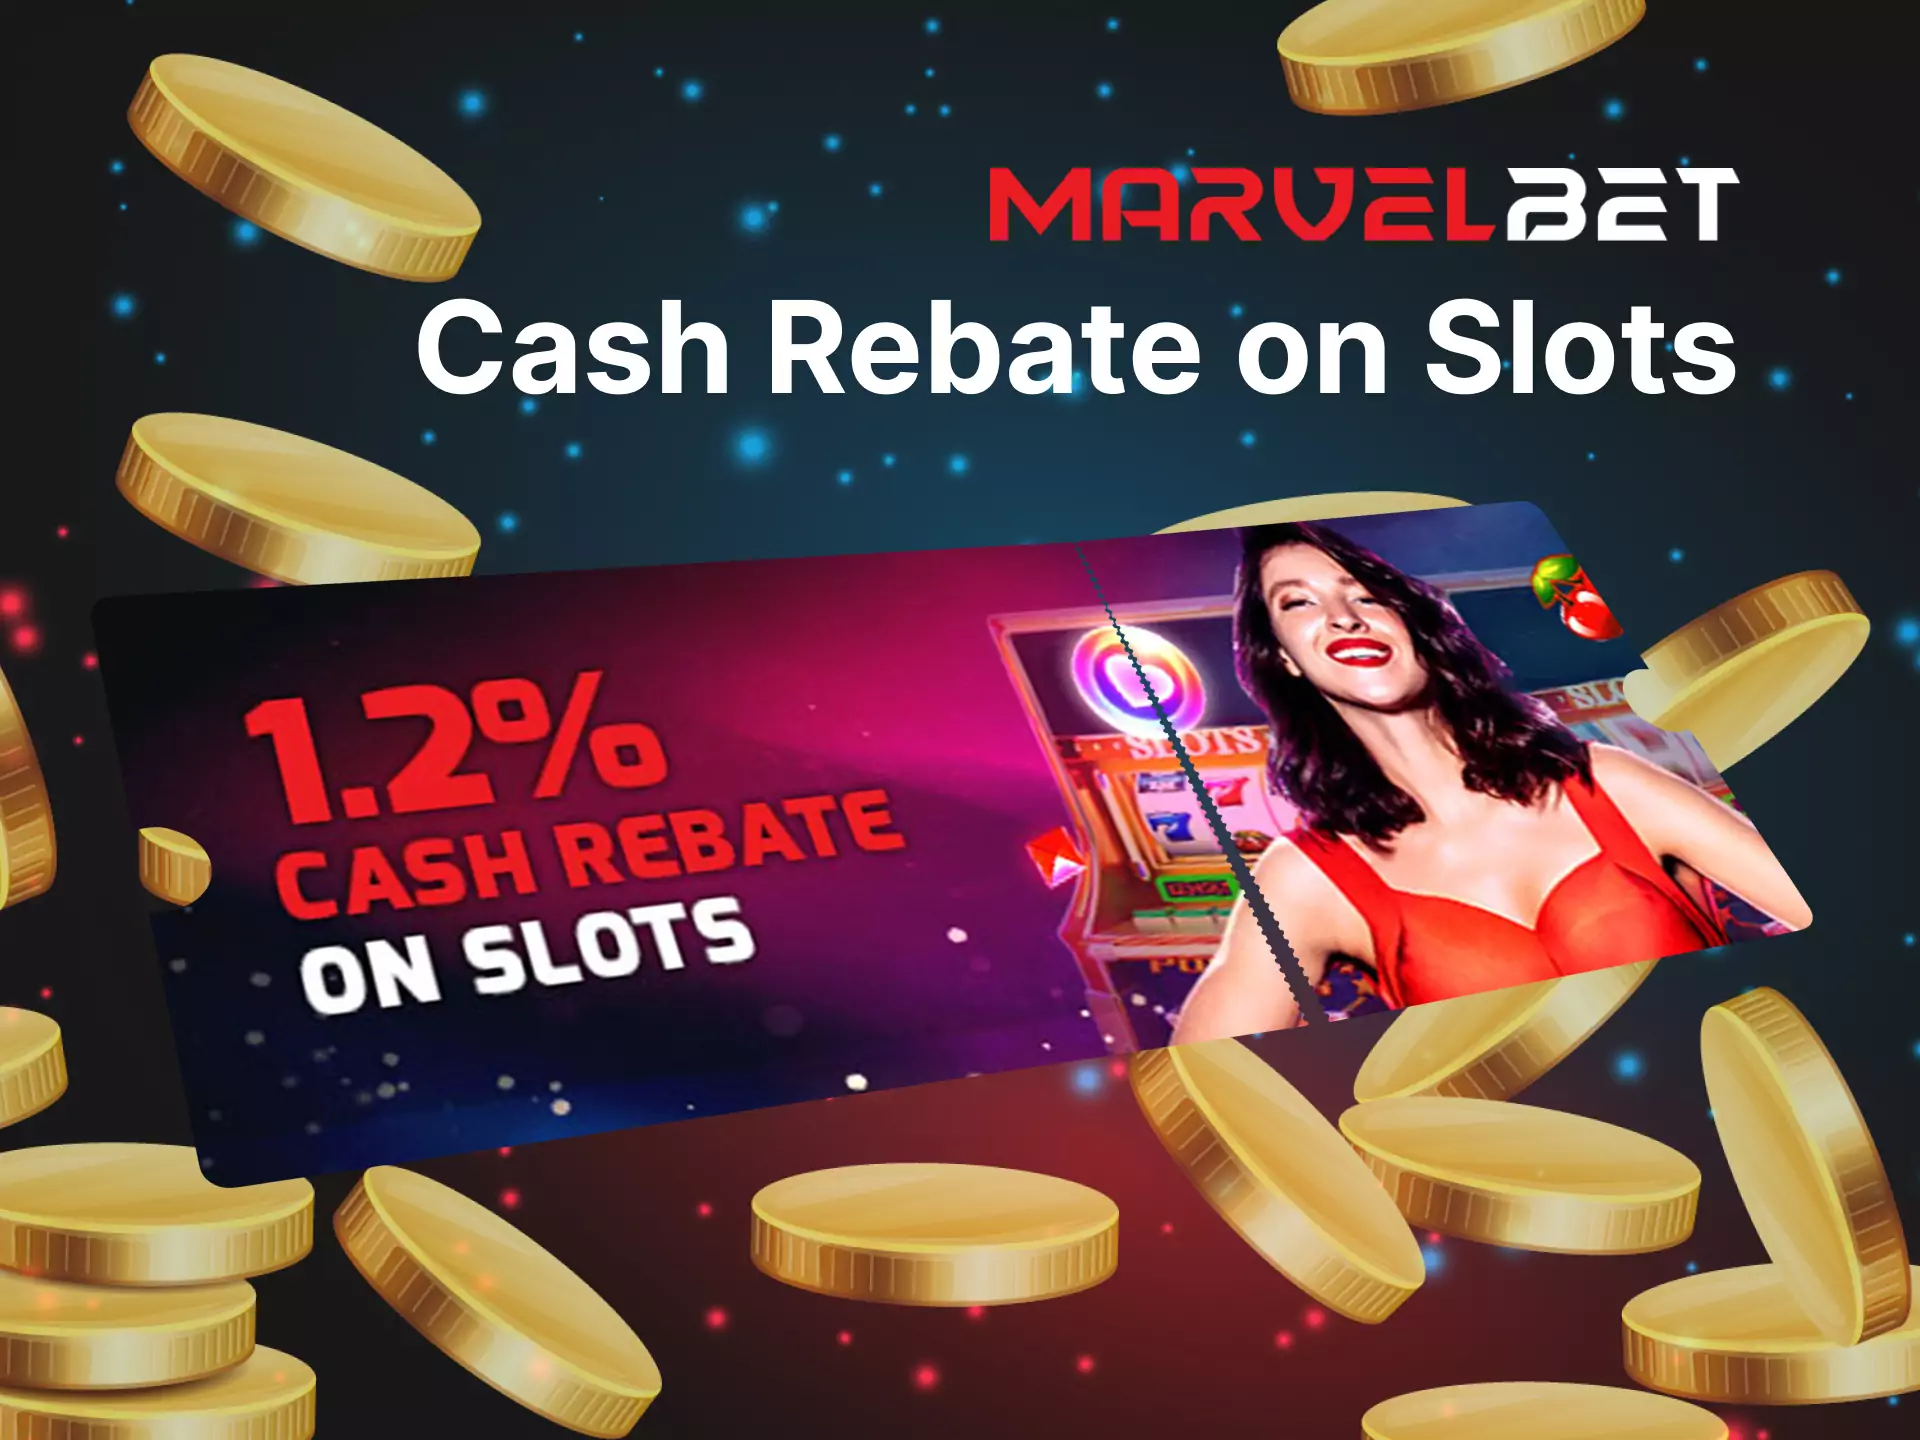 Play slots on the Marvelbet website and get the cash rebate.